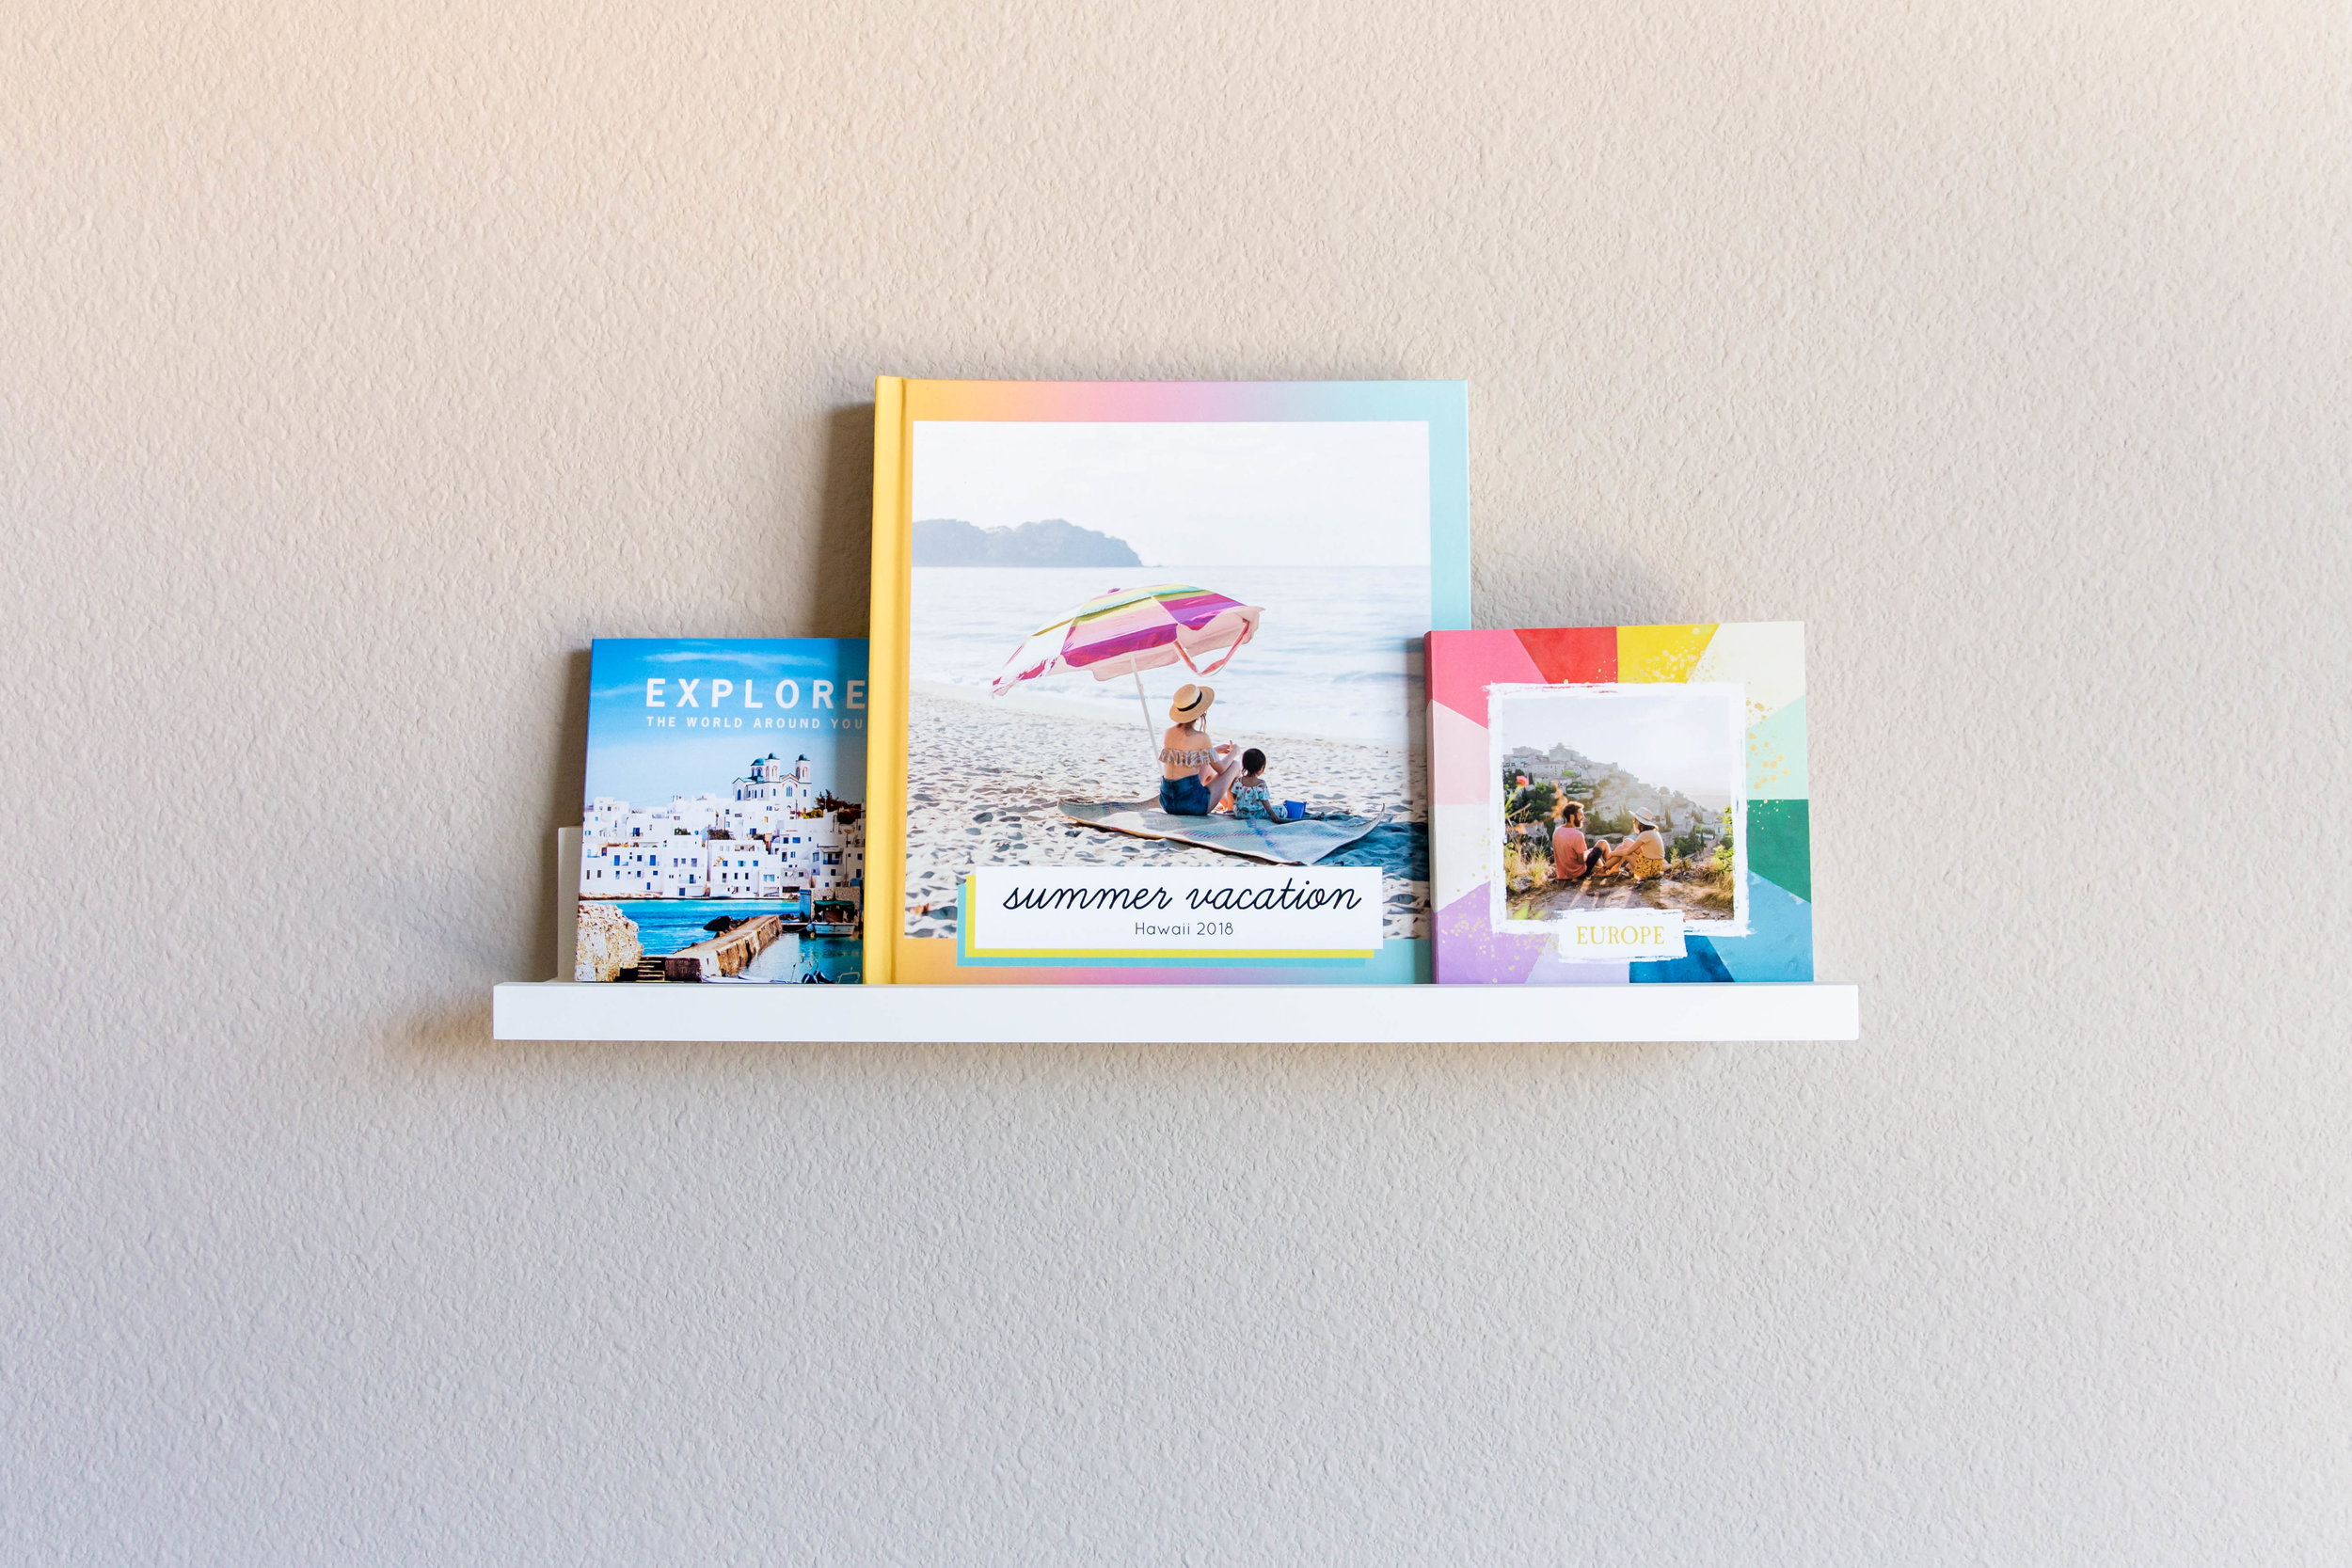 Hello World: 15 Travel Scrapbooking Ideas for the Globetrotter